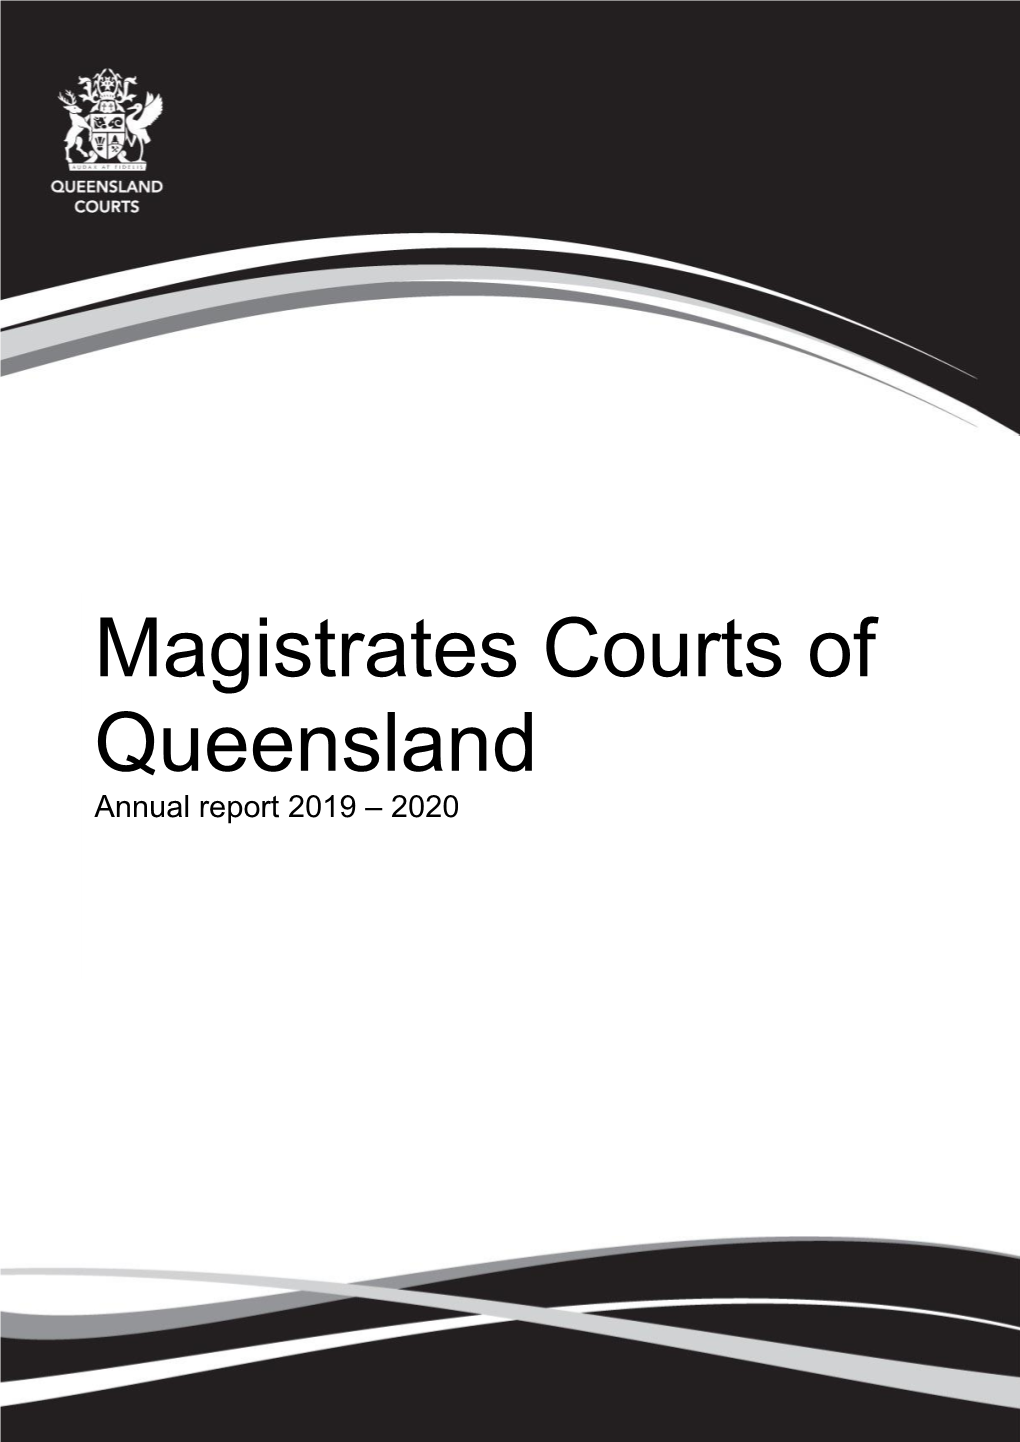 Magistrates Courts of Queensland Annual Report 2019 – 2020